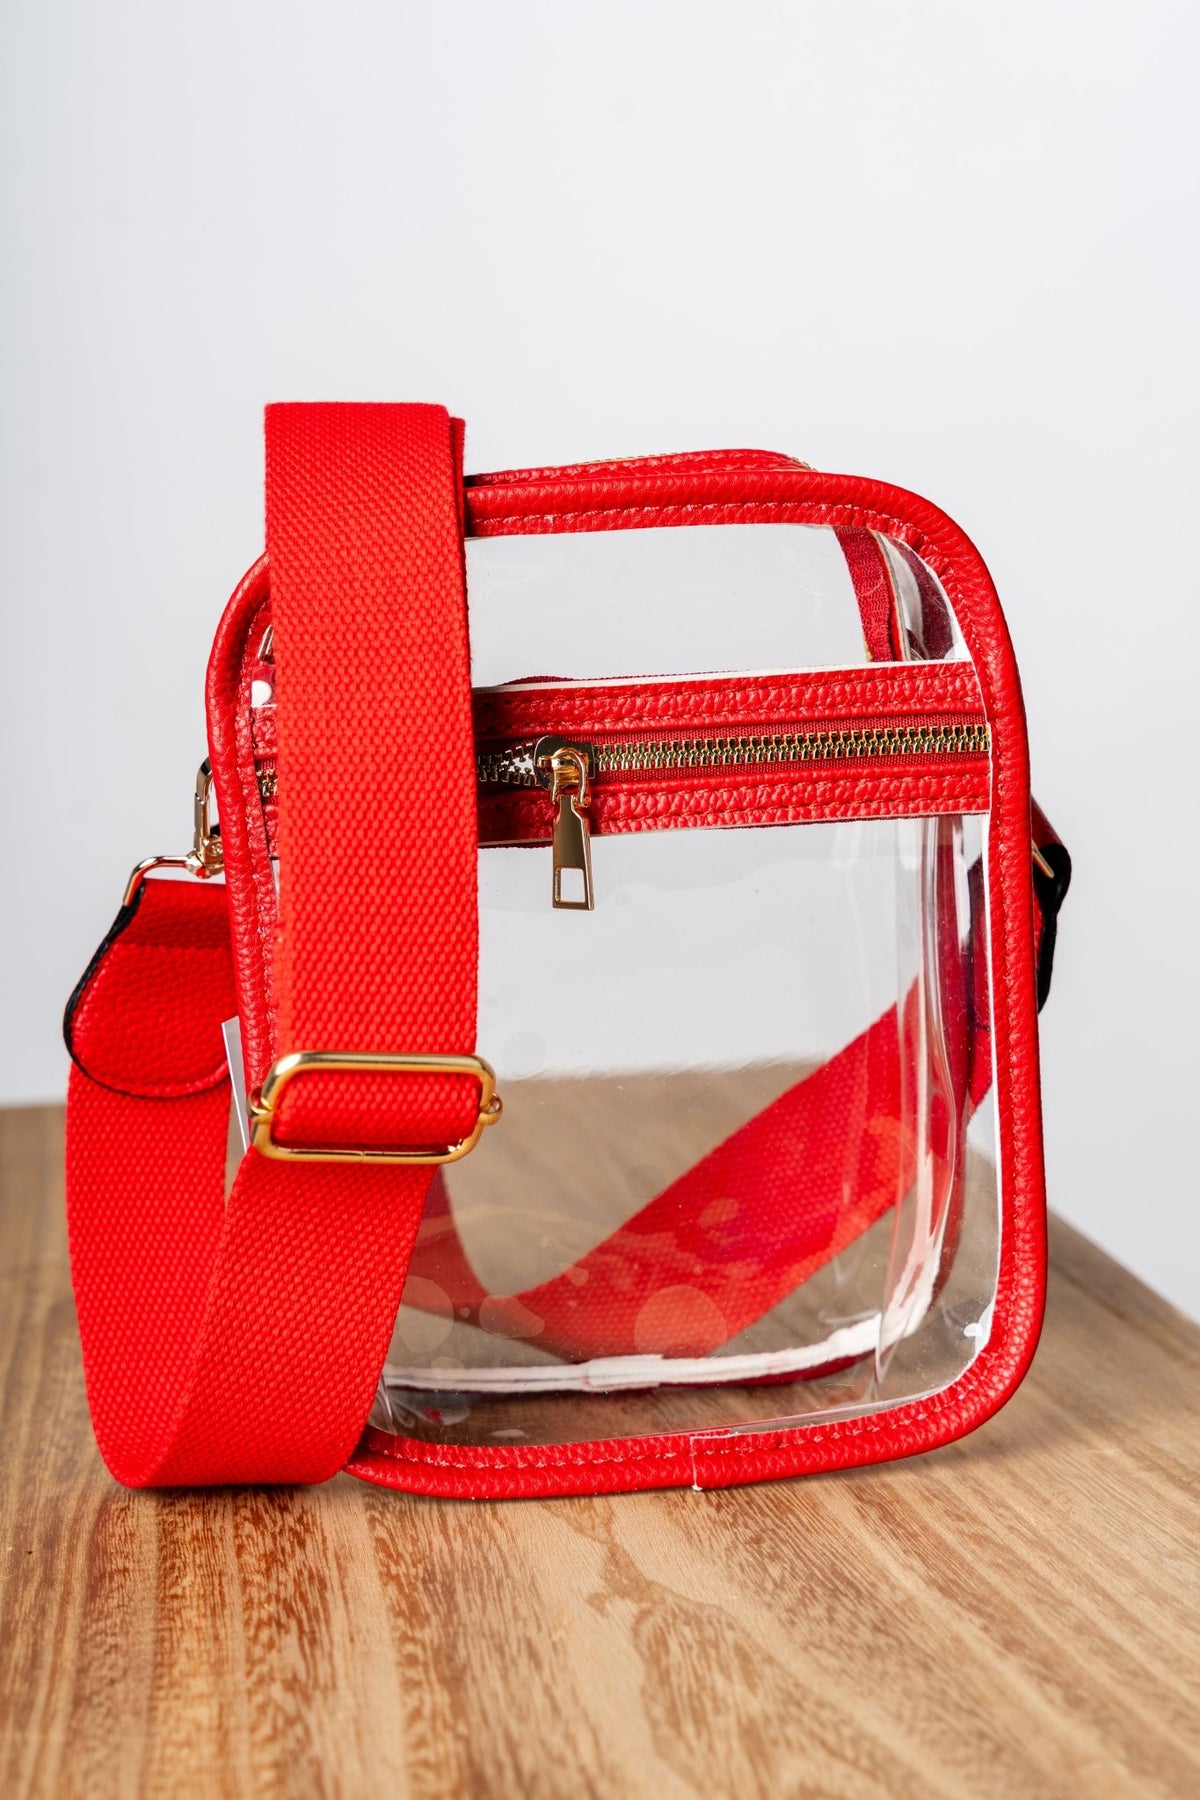 Clear crossbody stadium purse red - Trendy Bags at Lush Fashion Lounge Boutique in Oklahoma City